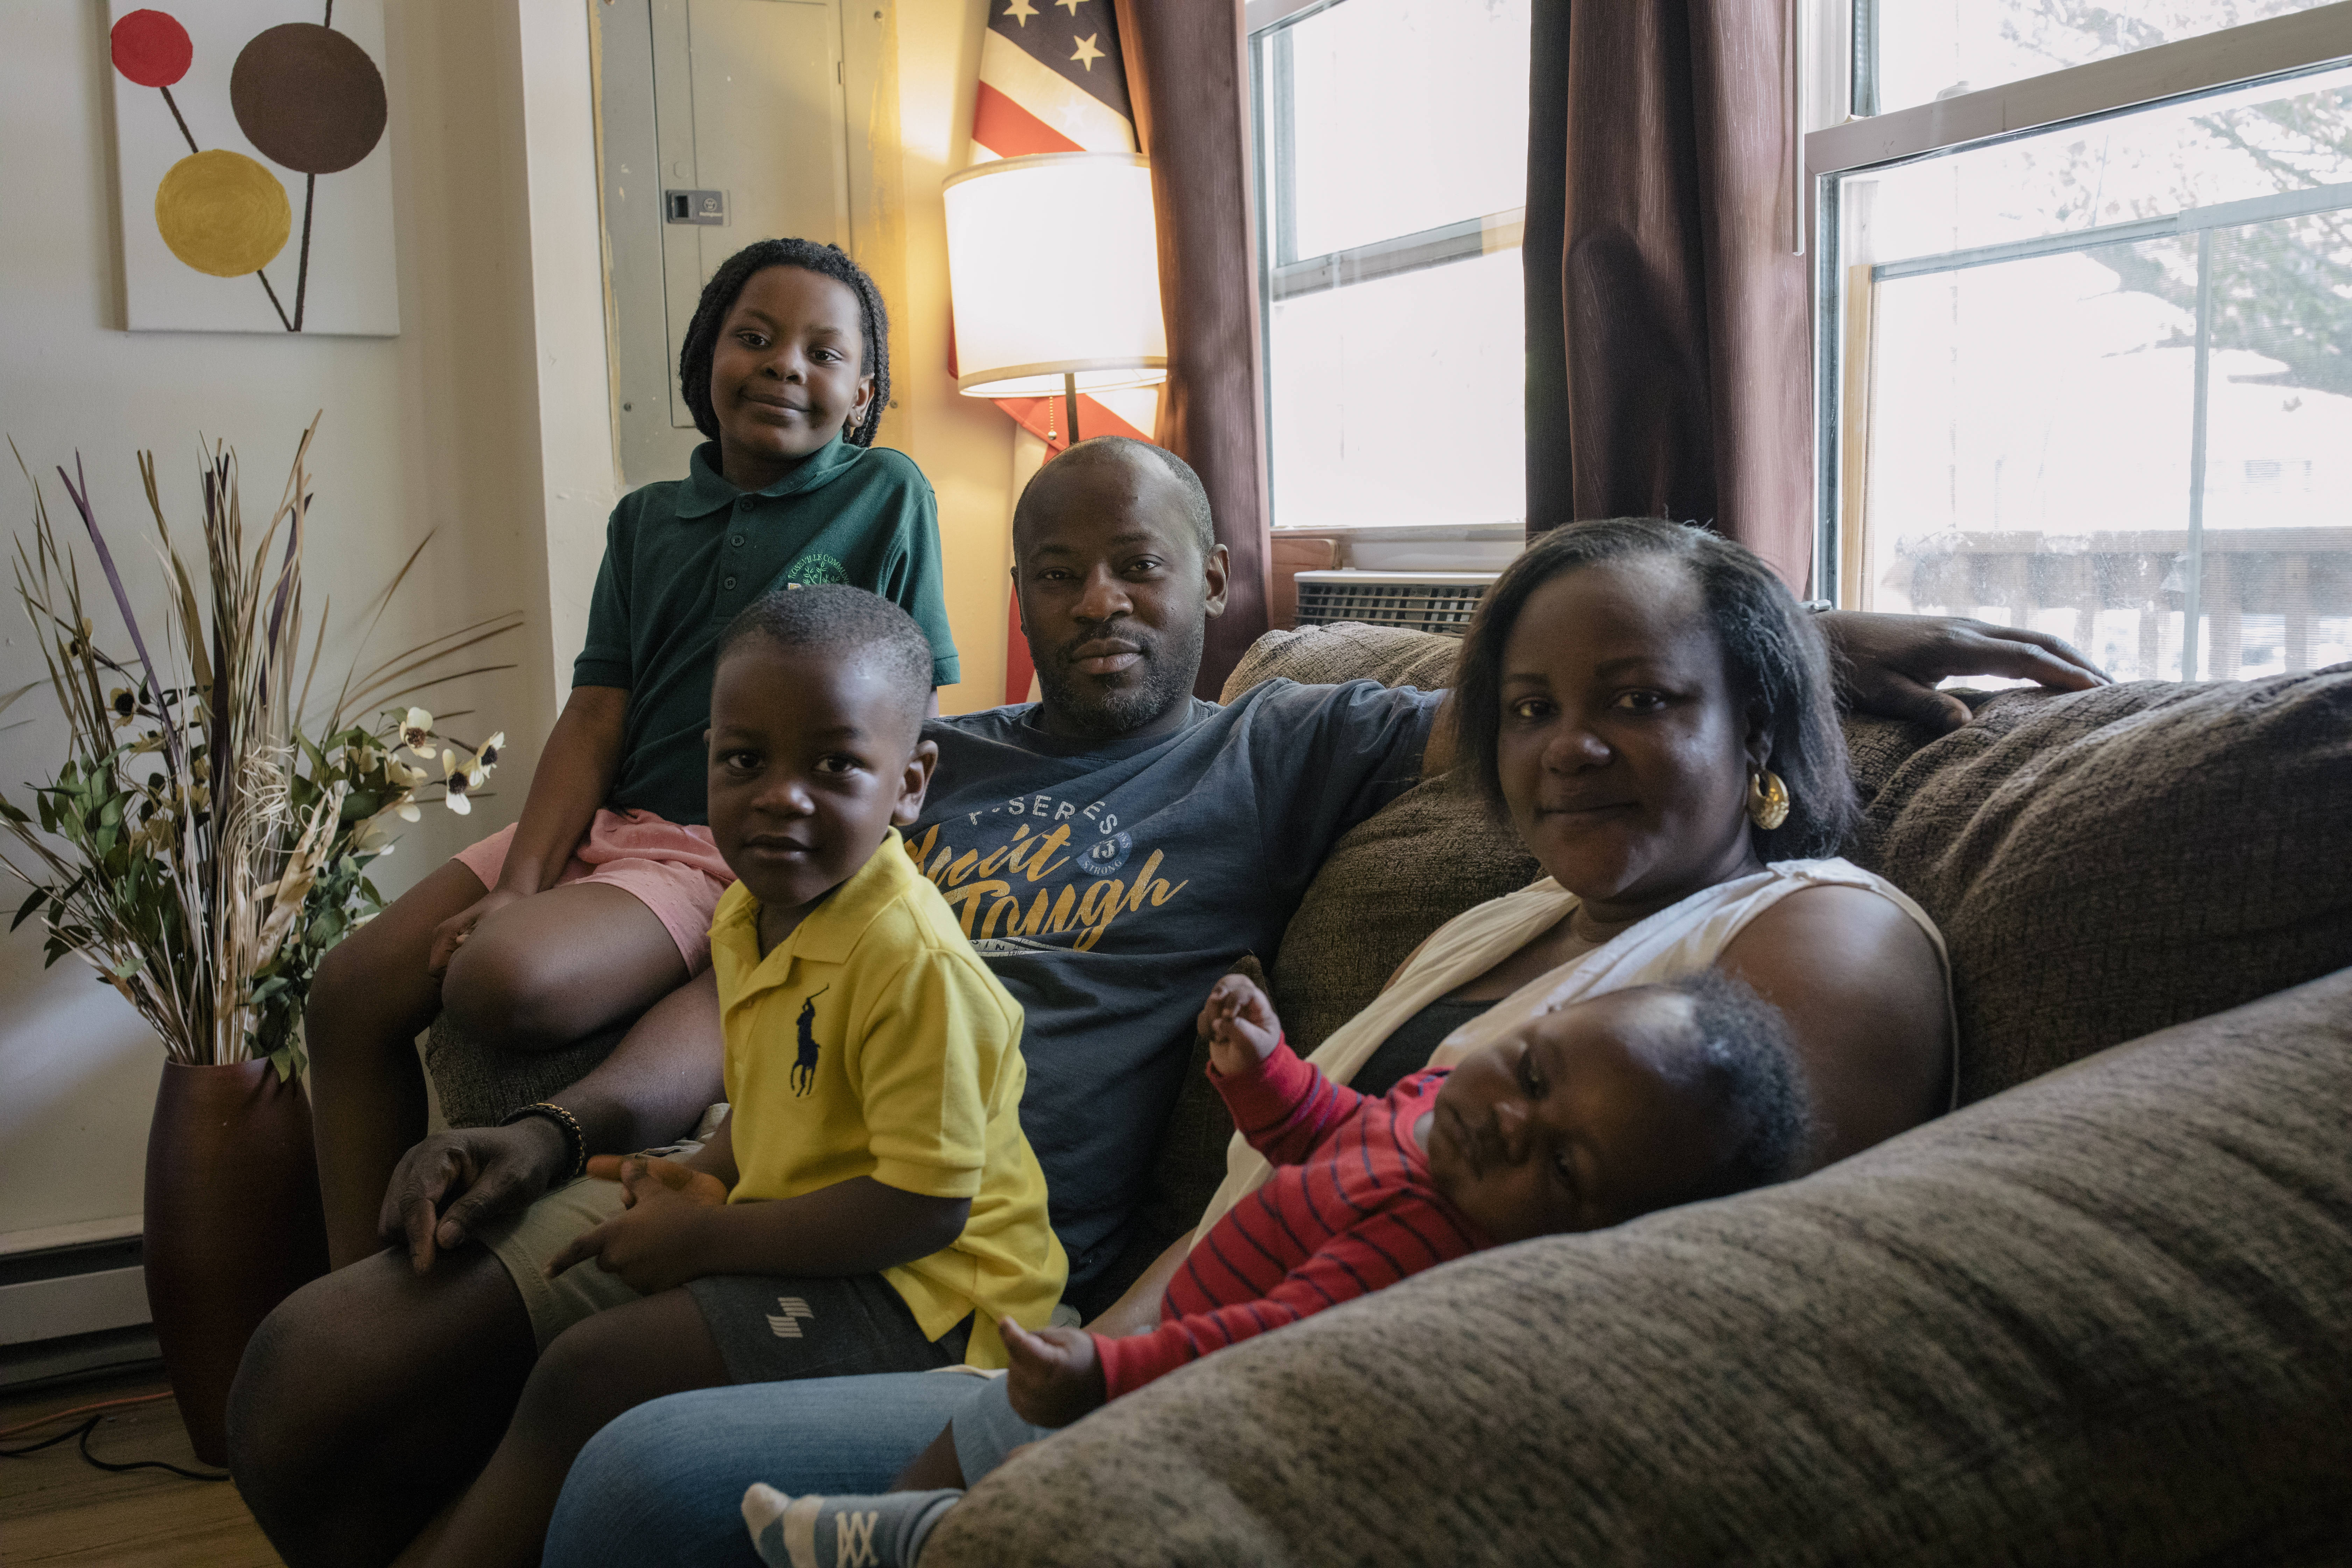 The Dairo family, consisting of parents John and Oyefunmilola and their young children, Abigail, Michael and infant Elijah, sit together on their living room couch next to a window.